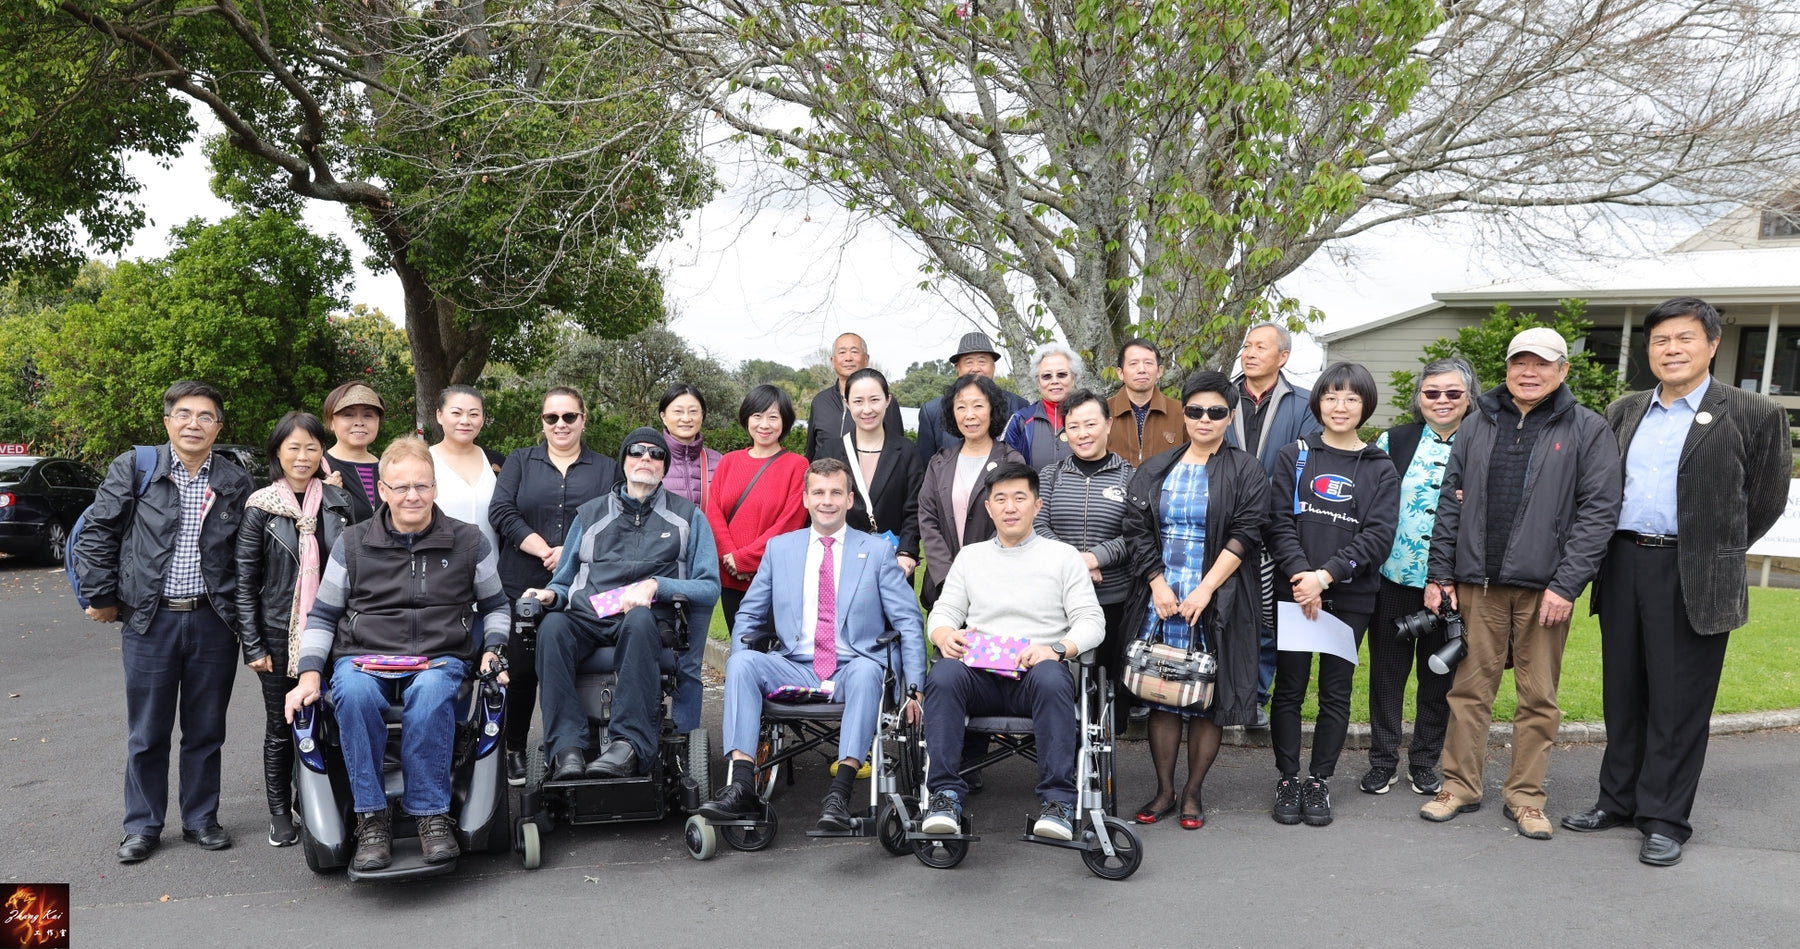 Group of people outdoor with several in wheelchairs